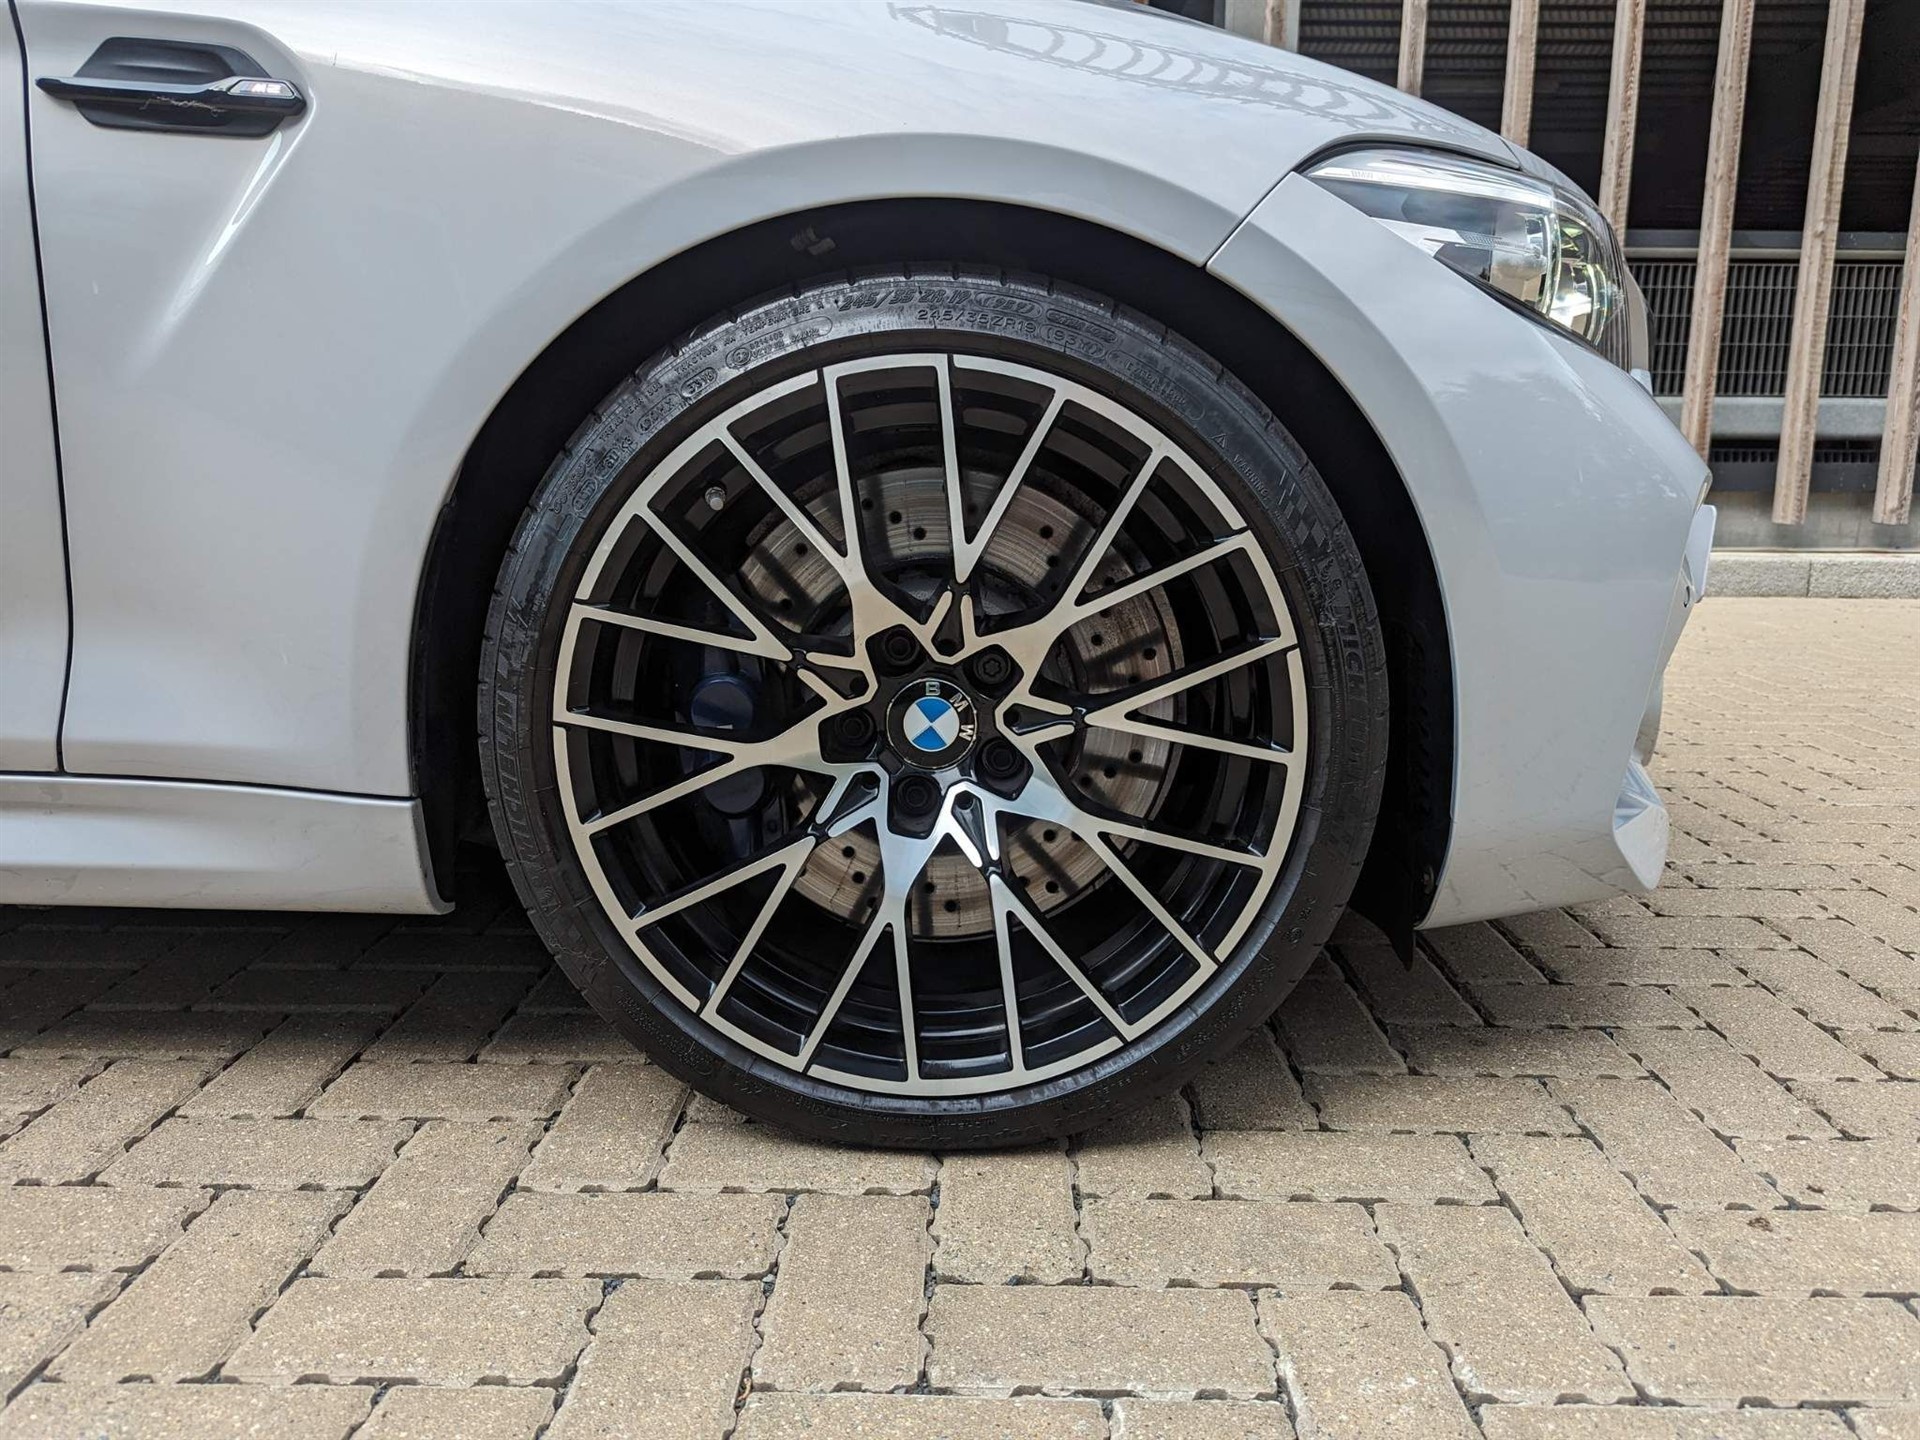 Used BMW M2 for sale in Watford, Hertfordshire